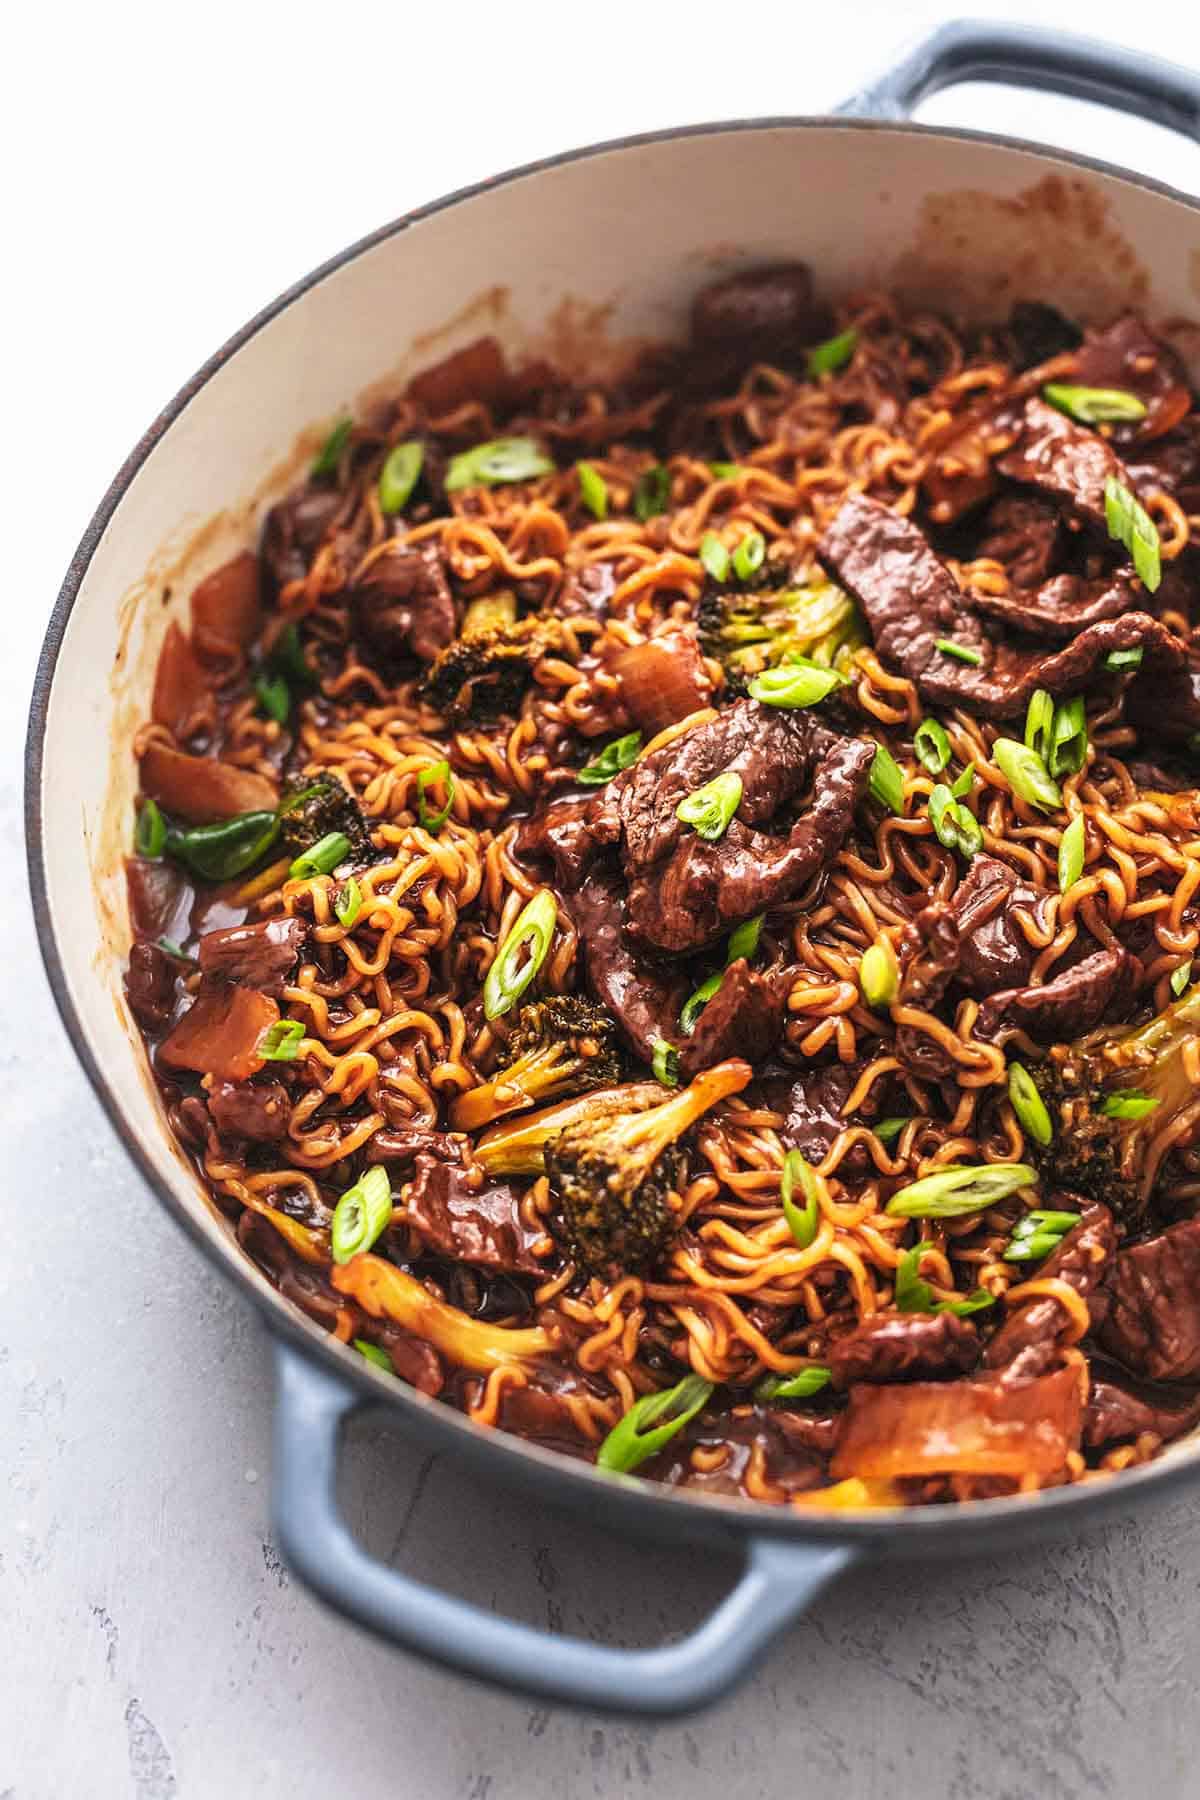 Magnolian beef and broccoli with noodles in a skillet.